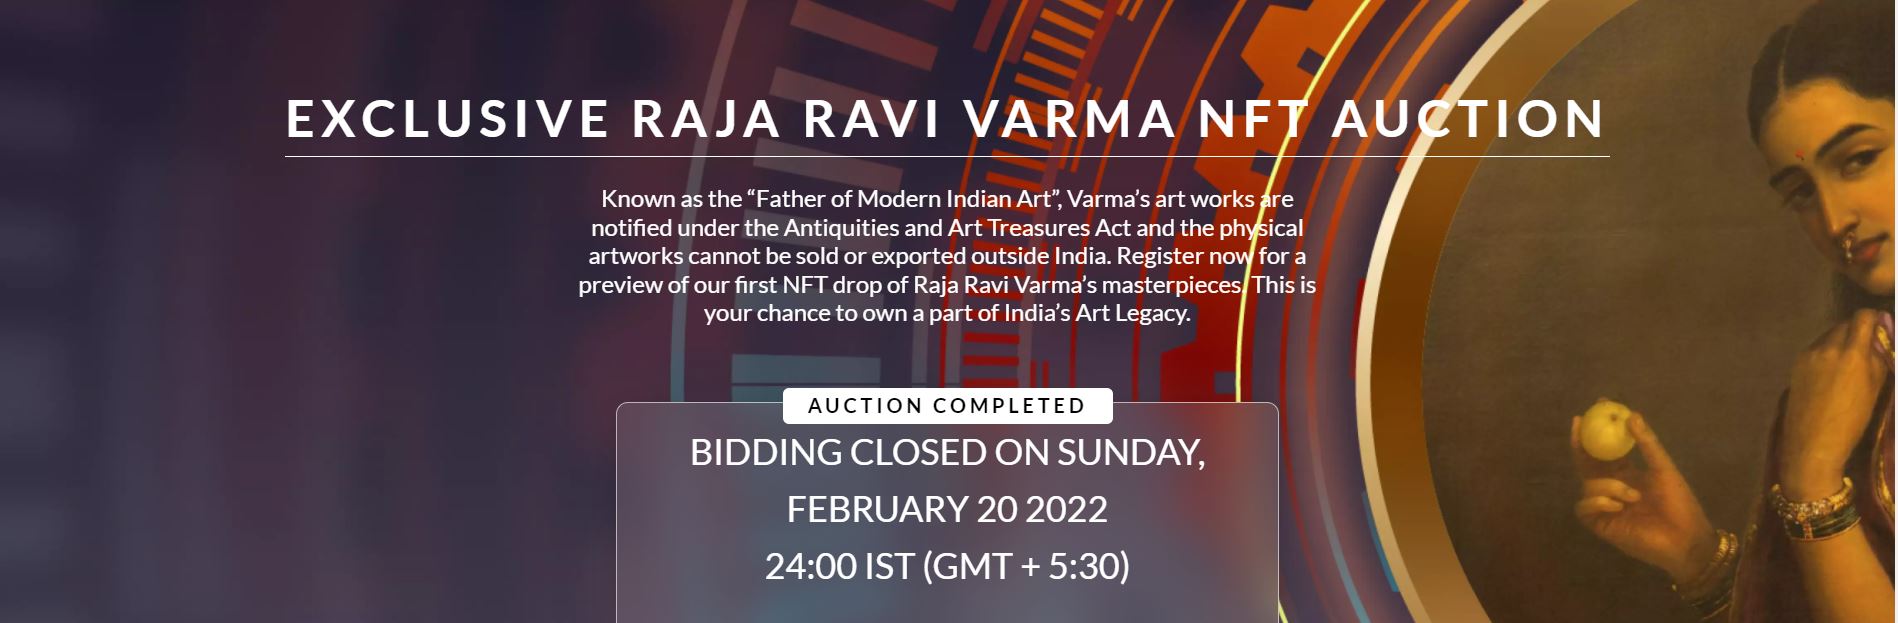 Poster of RAJA RAVI VARMA NFT AUCTION at NFT marketplace art.rtistiq with some explanation of the artist and his artwork in background